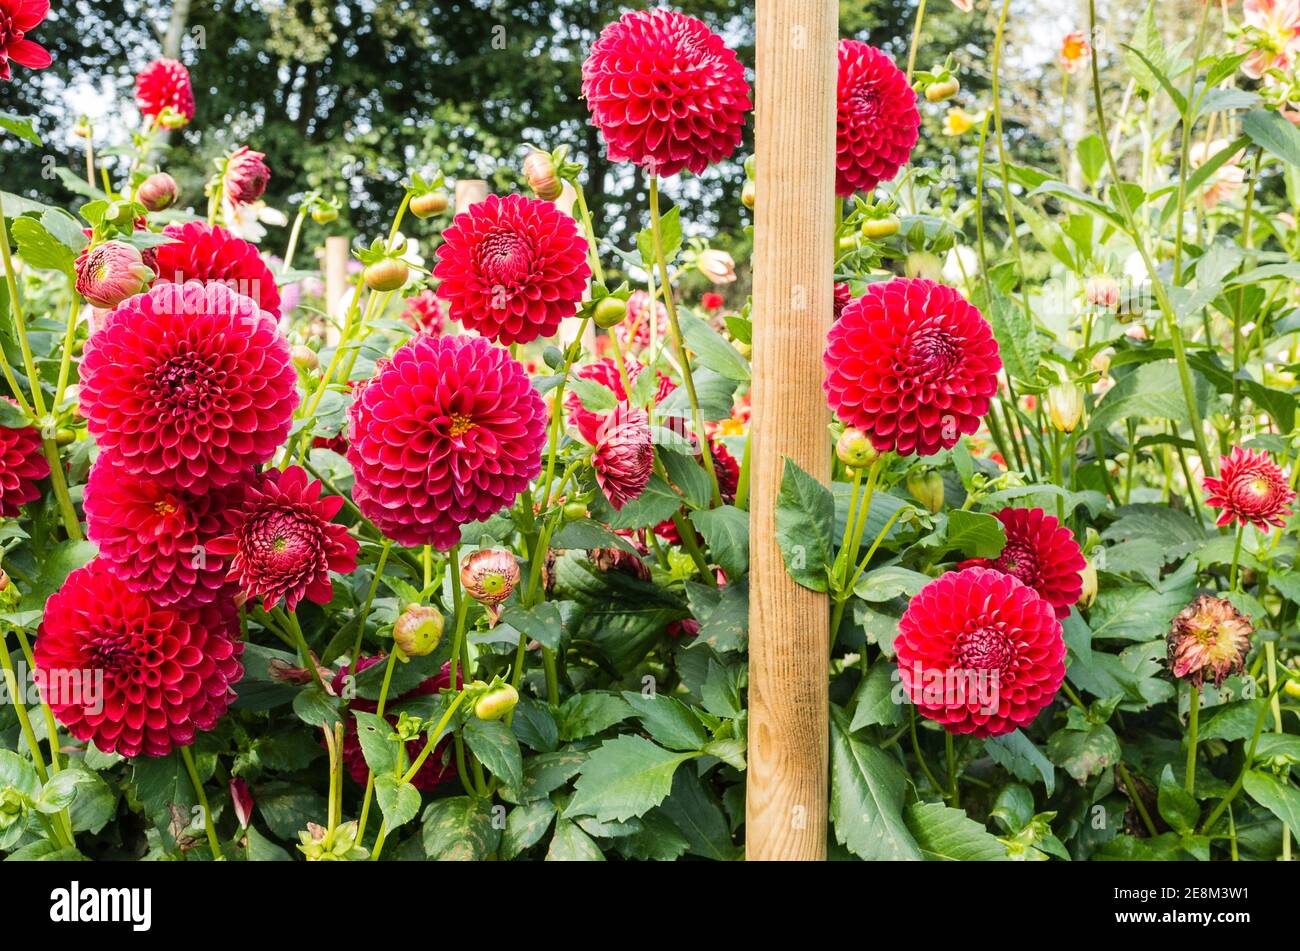 Bright red flowers of Dahlia Danjo Doc growing in a nursery field in Hampshire showing one of the poles supporting a frame of support netting as the plants grow taller Stock Photo